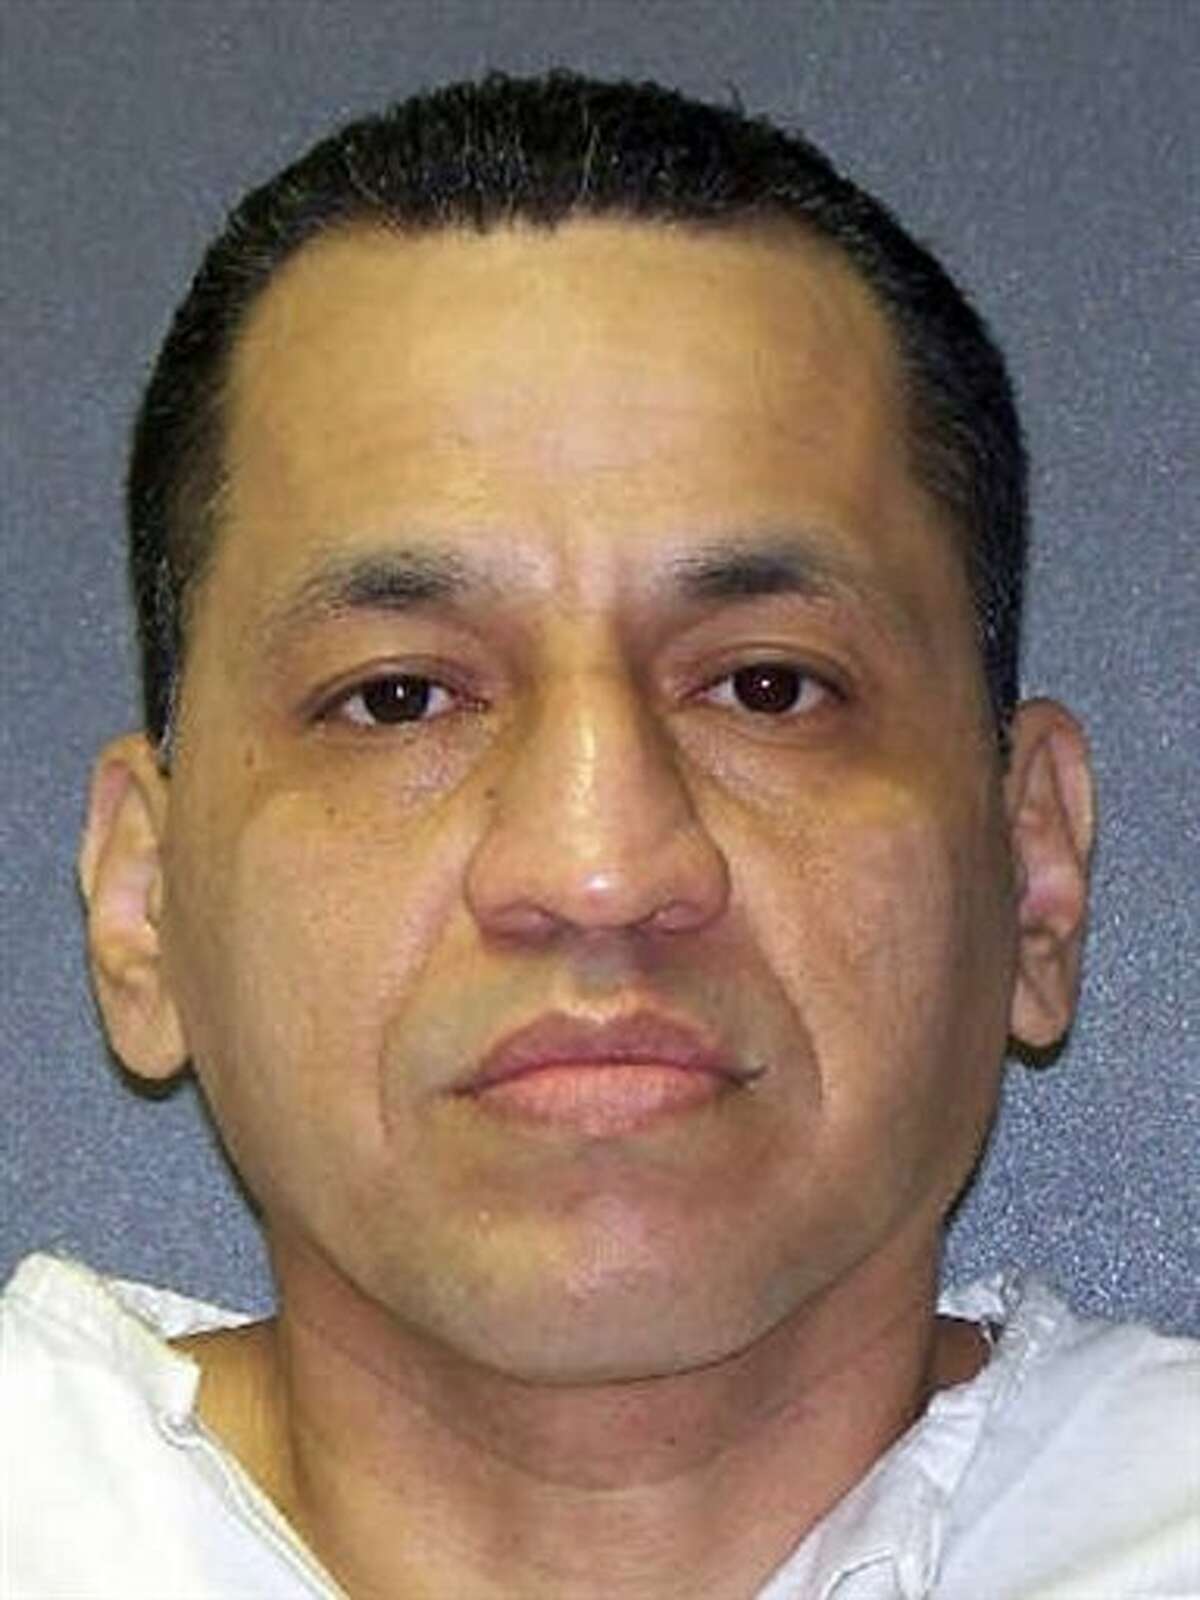 This photo provided by the Texas Department of Criminal Justice shows Jesse Joe Hernandez. Hernandez already was a convicted child sex offender when he was arrested for the beating death of a 10-month-old boy he was babysitting at a Dallas home. He is set for execution Wednesday evening for the baby's death 11 years ago. (AP Photo/Texas Department of Criminal Justice)